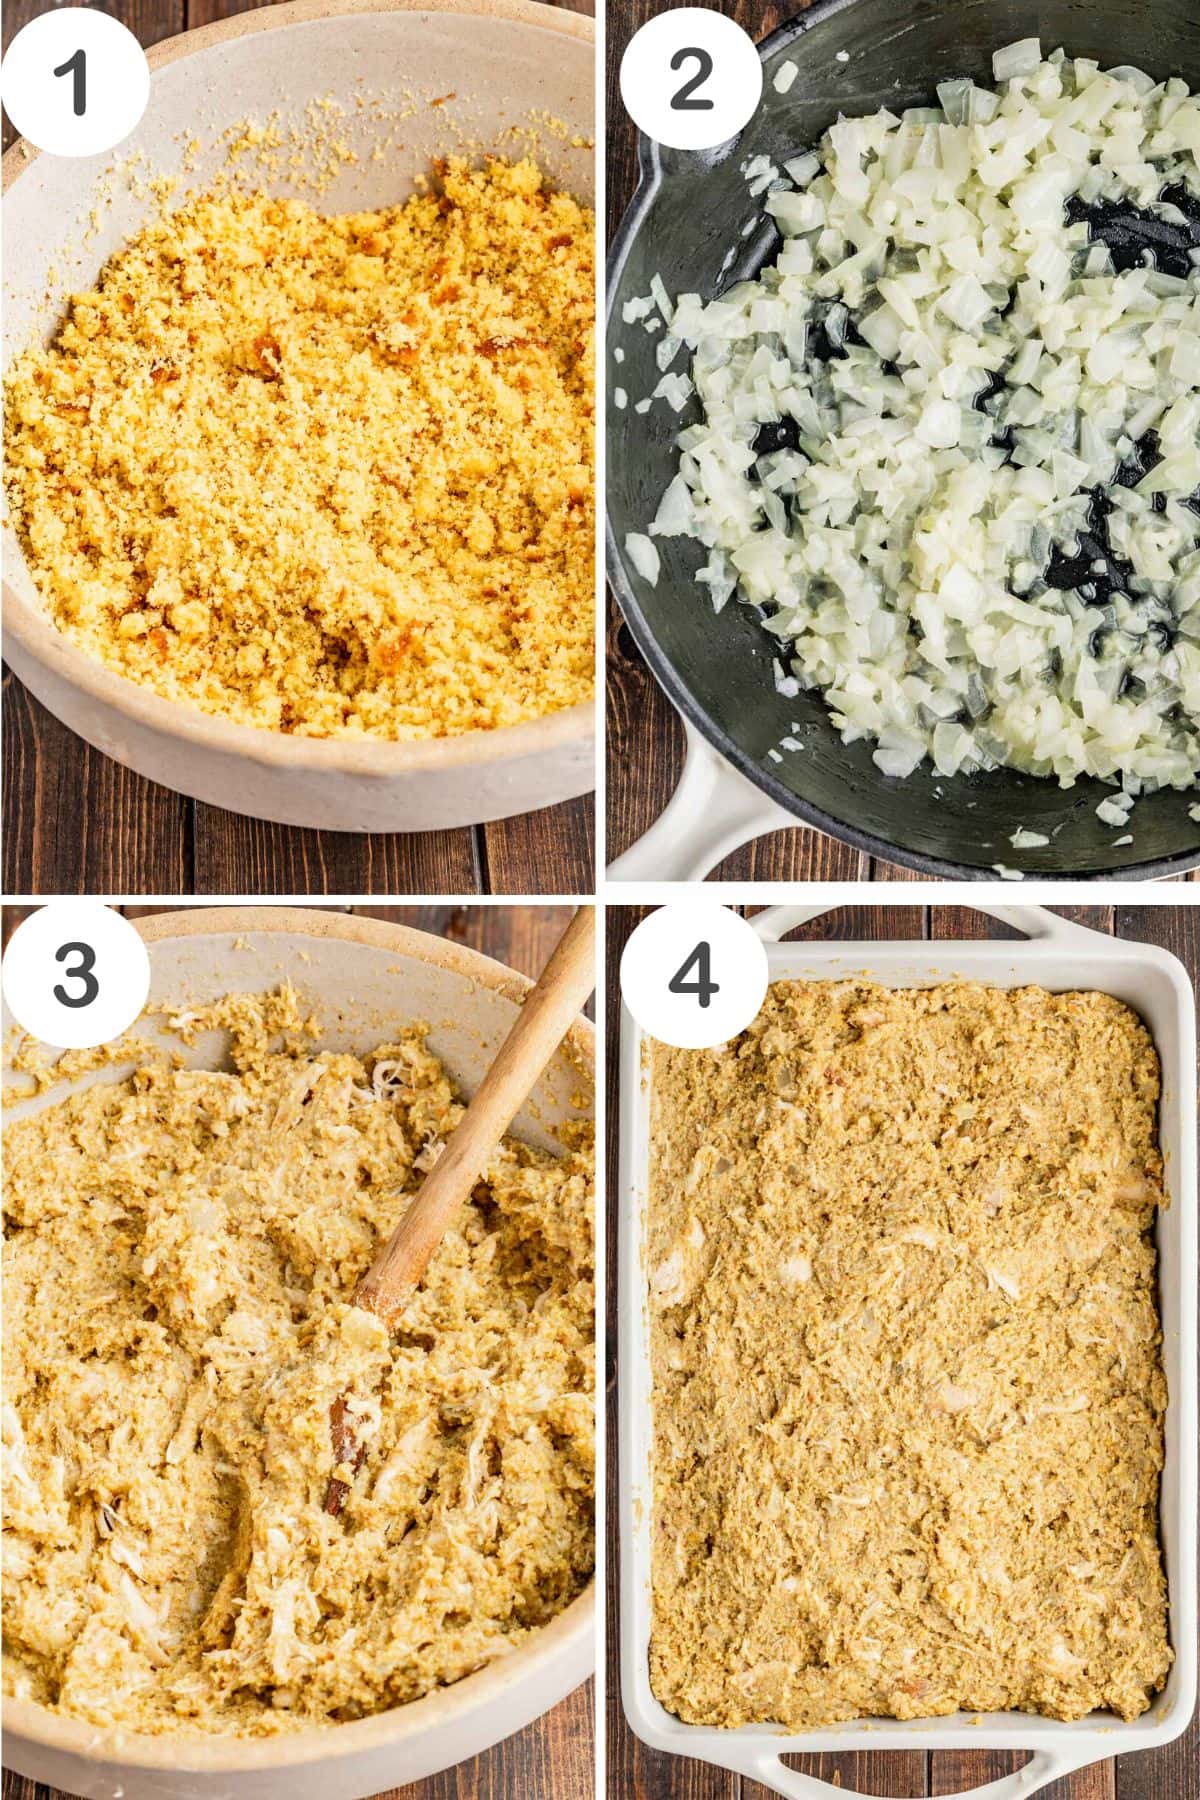 numbered step by step photos showing how to prepare cornbread dressing